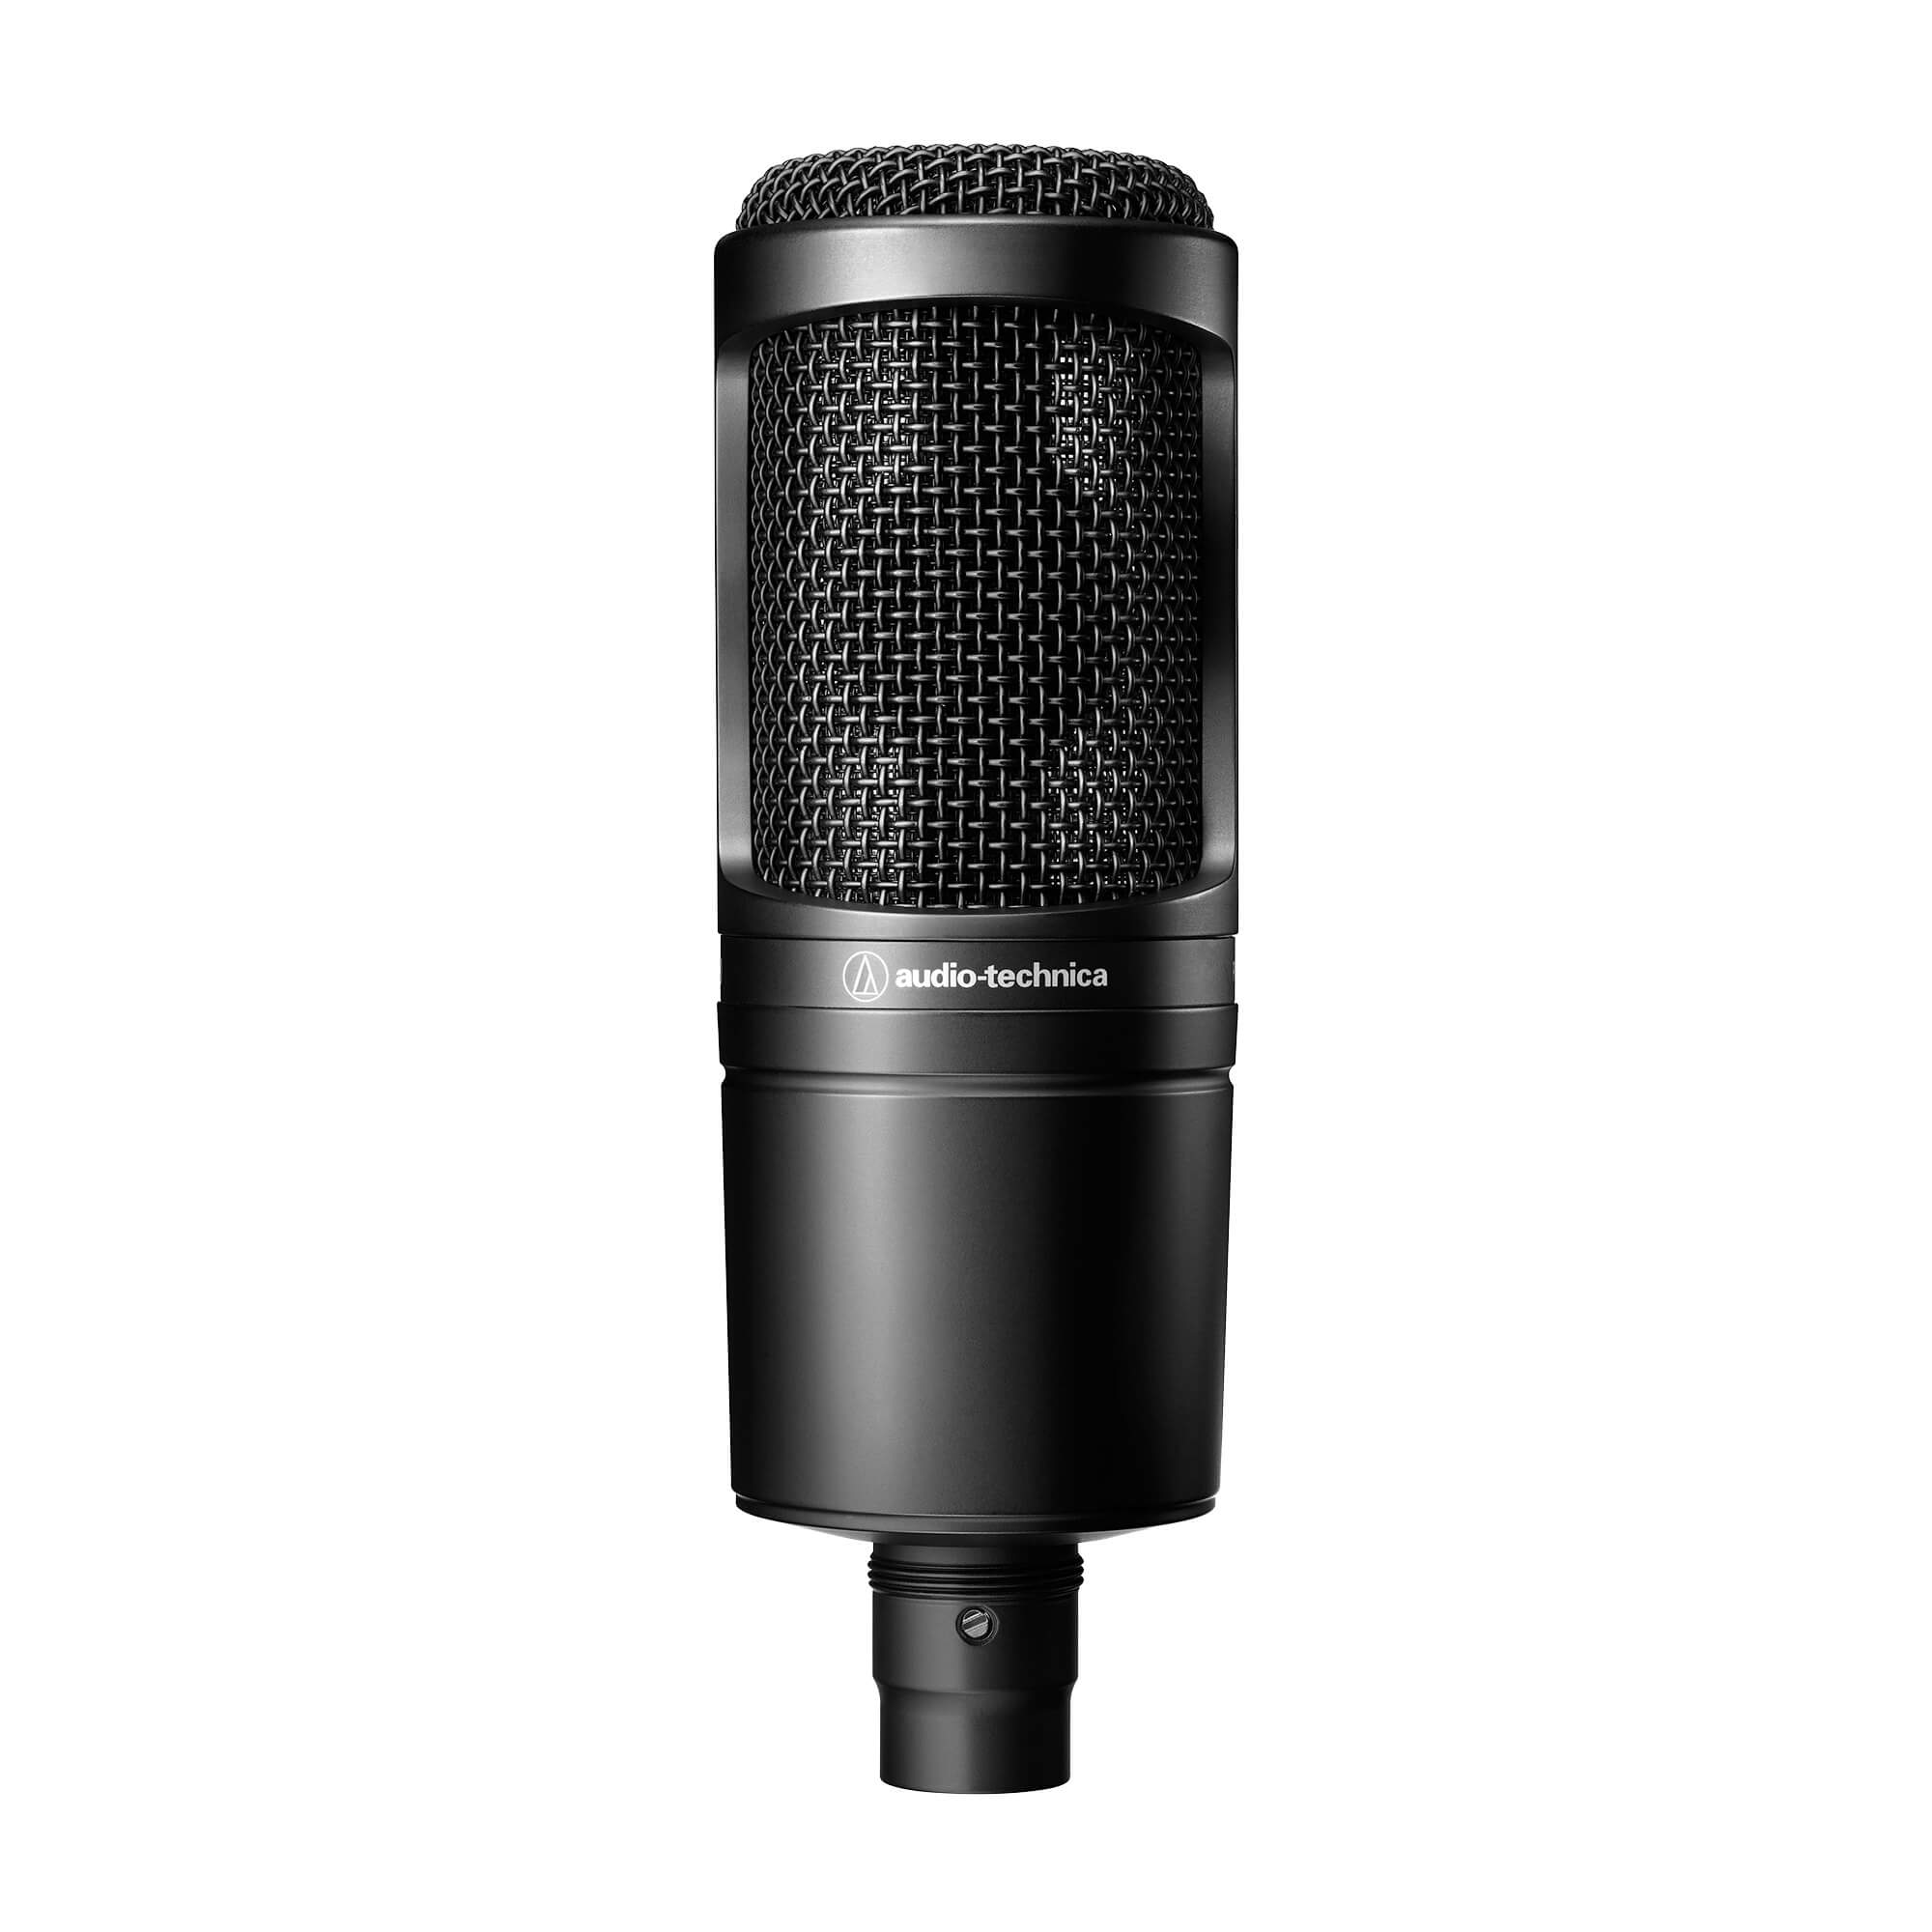 Audio Technica AT2040 podcast microphone review: an affordable mic fit for  radio